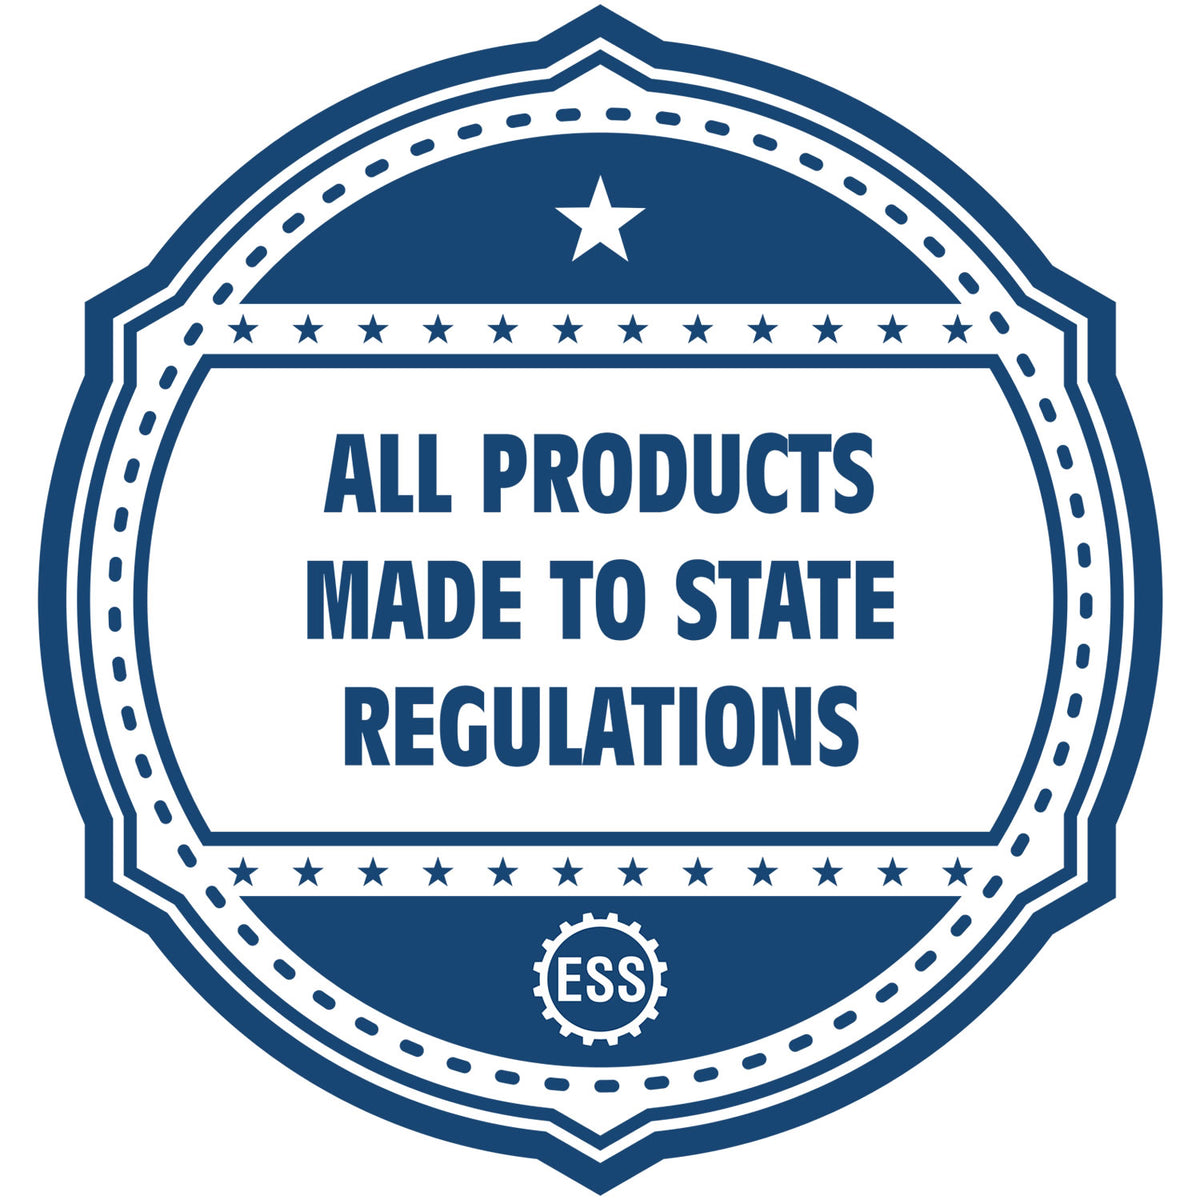 An icon or badge element for the Heavy Duty Cast Iron Michigan Land Surveyor Seal Embosser showing that this product is made in compliance with state regulations.